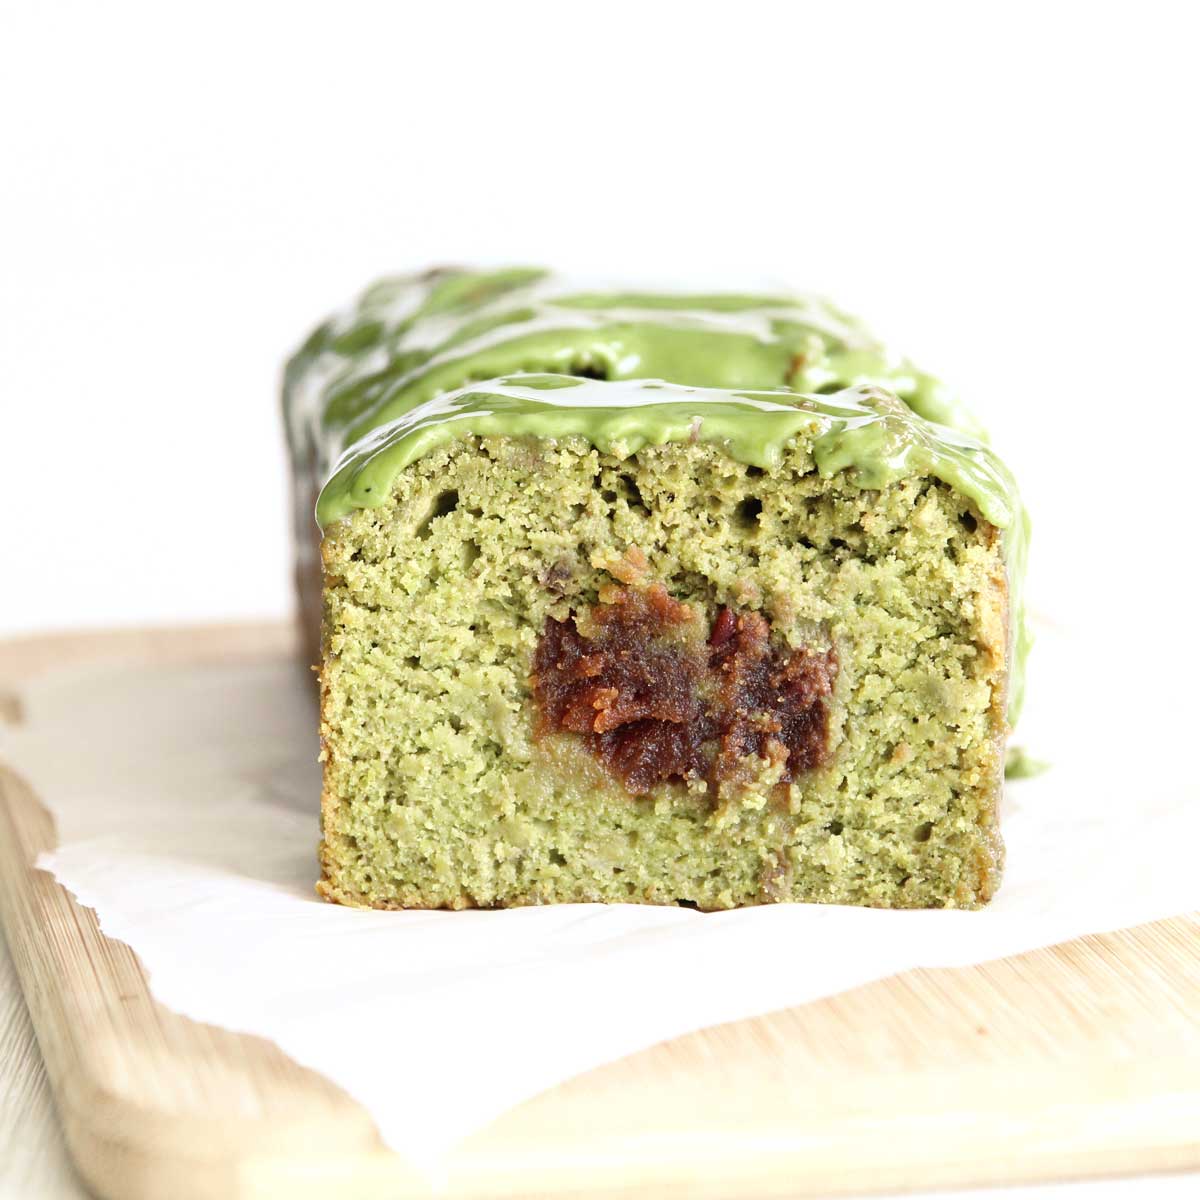 How to Make Matcha Banana Bread with Red Bean Paste Filling - Peppermint Whipped Cream